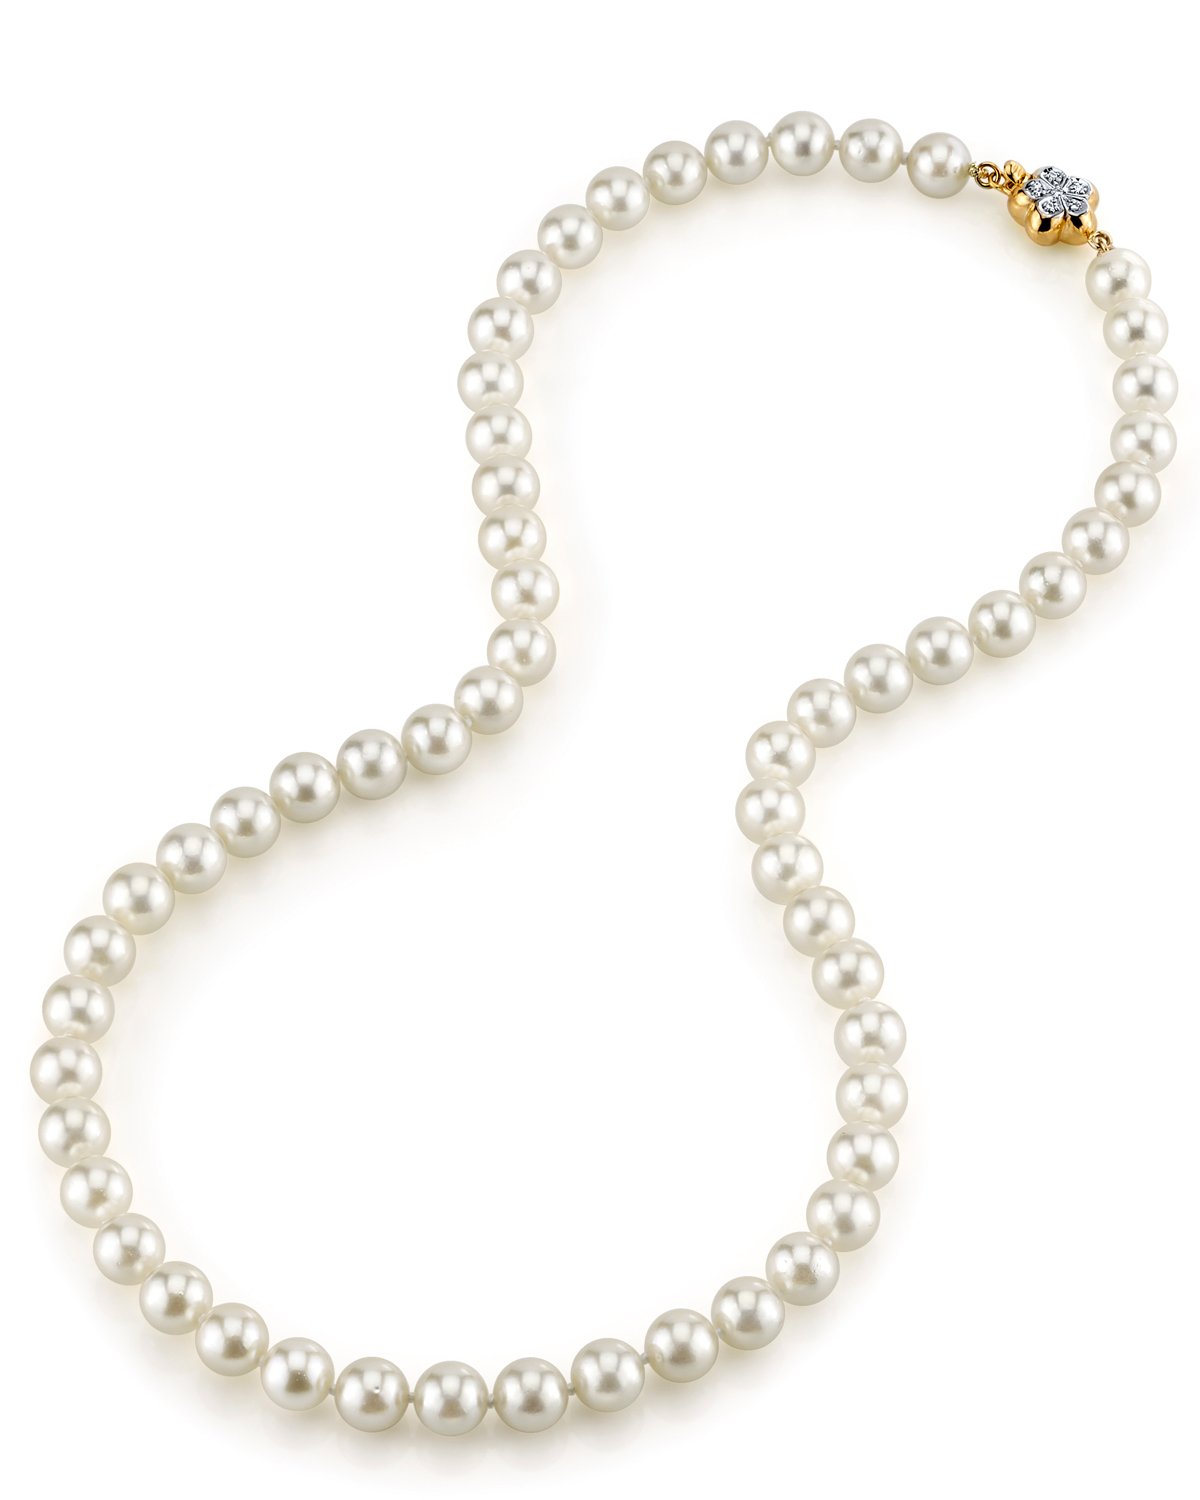 White Japanese Akoya Pearl Necklace, 7.0-7.5mm - AAA Pure